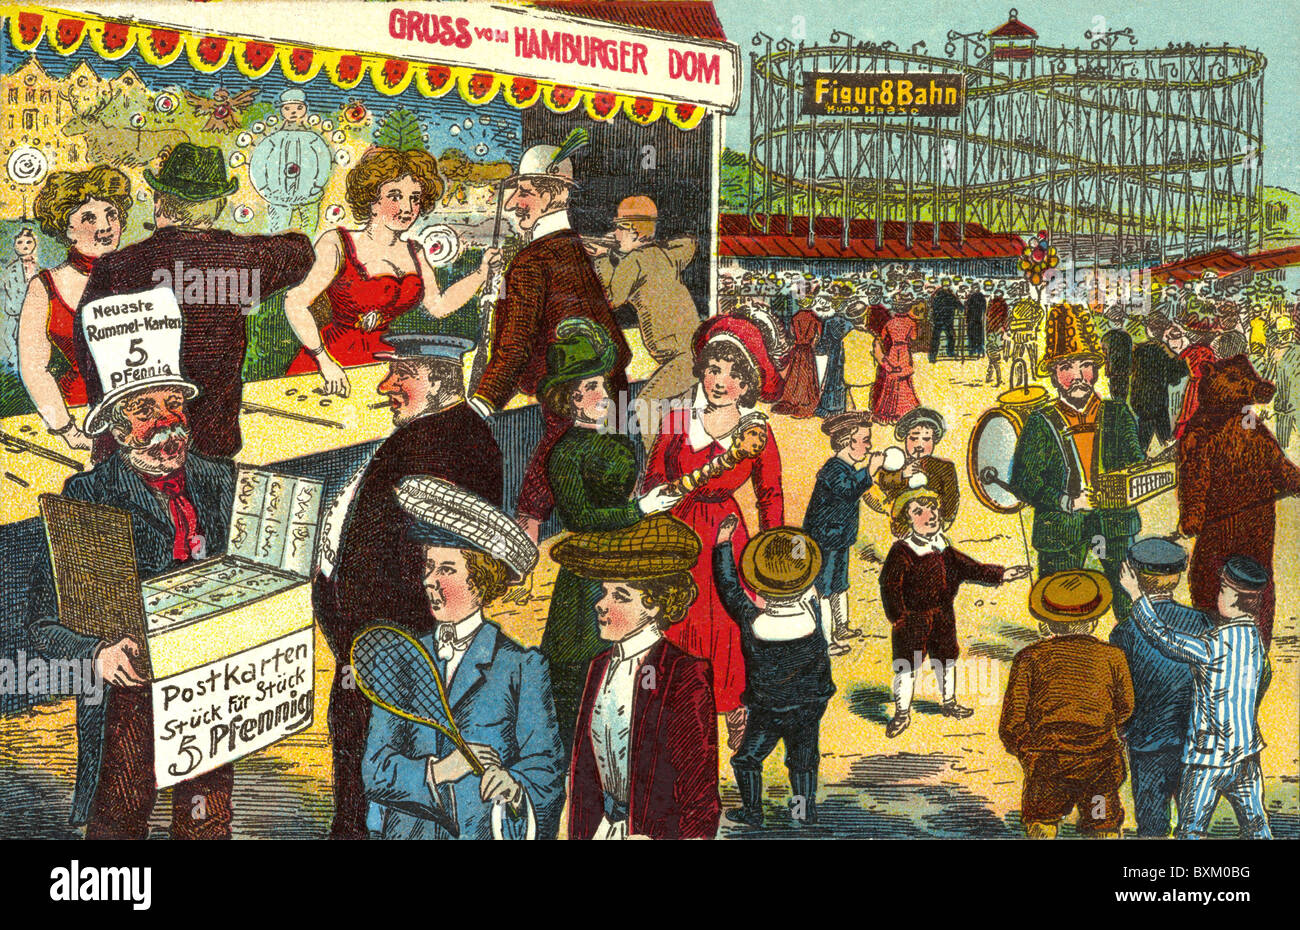 festivity, fair, Hamburg cathedral, fairground, visitors, picture postcard, lithograph, Germany, circa 1910, Additional-Rights-Clearences-Not Available Stock Photo